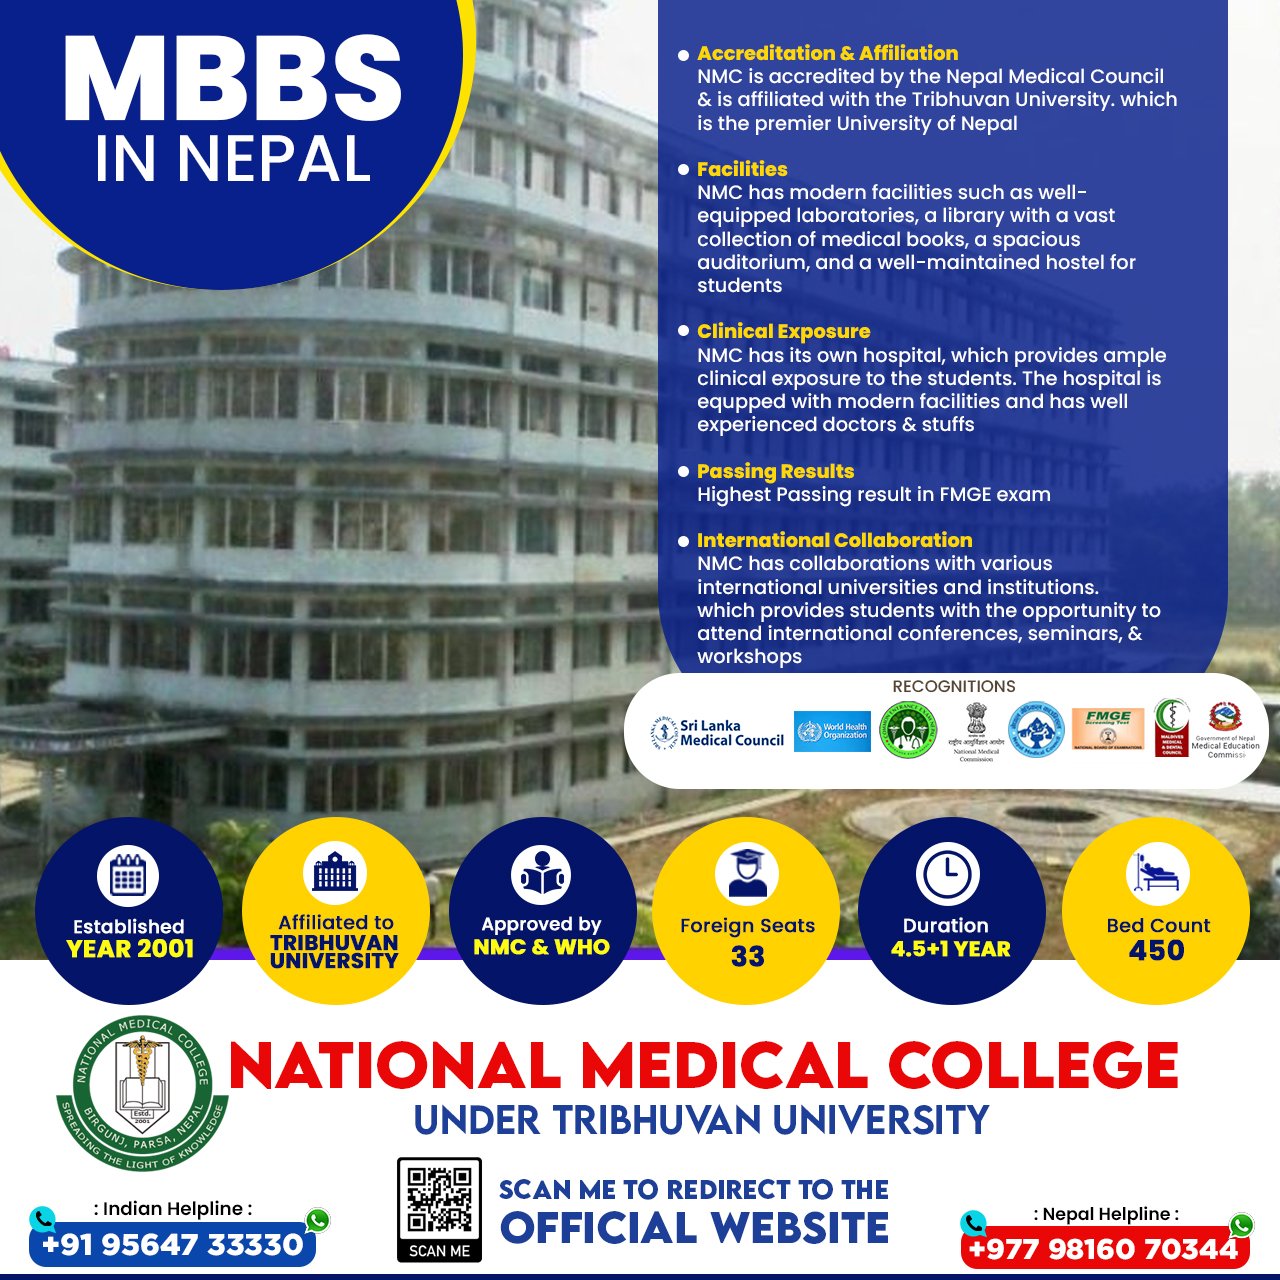 mbbs-in-nepal-at-national-medical-college-nepal-under-tribhuvan-university